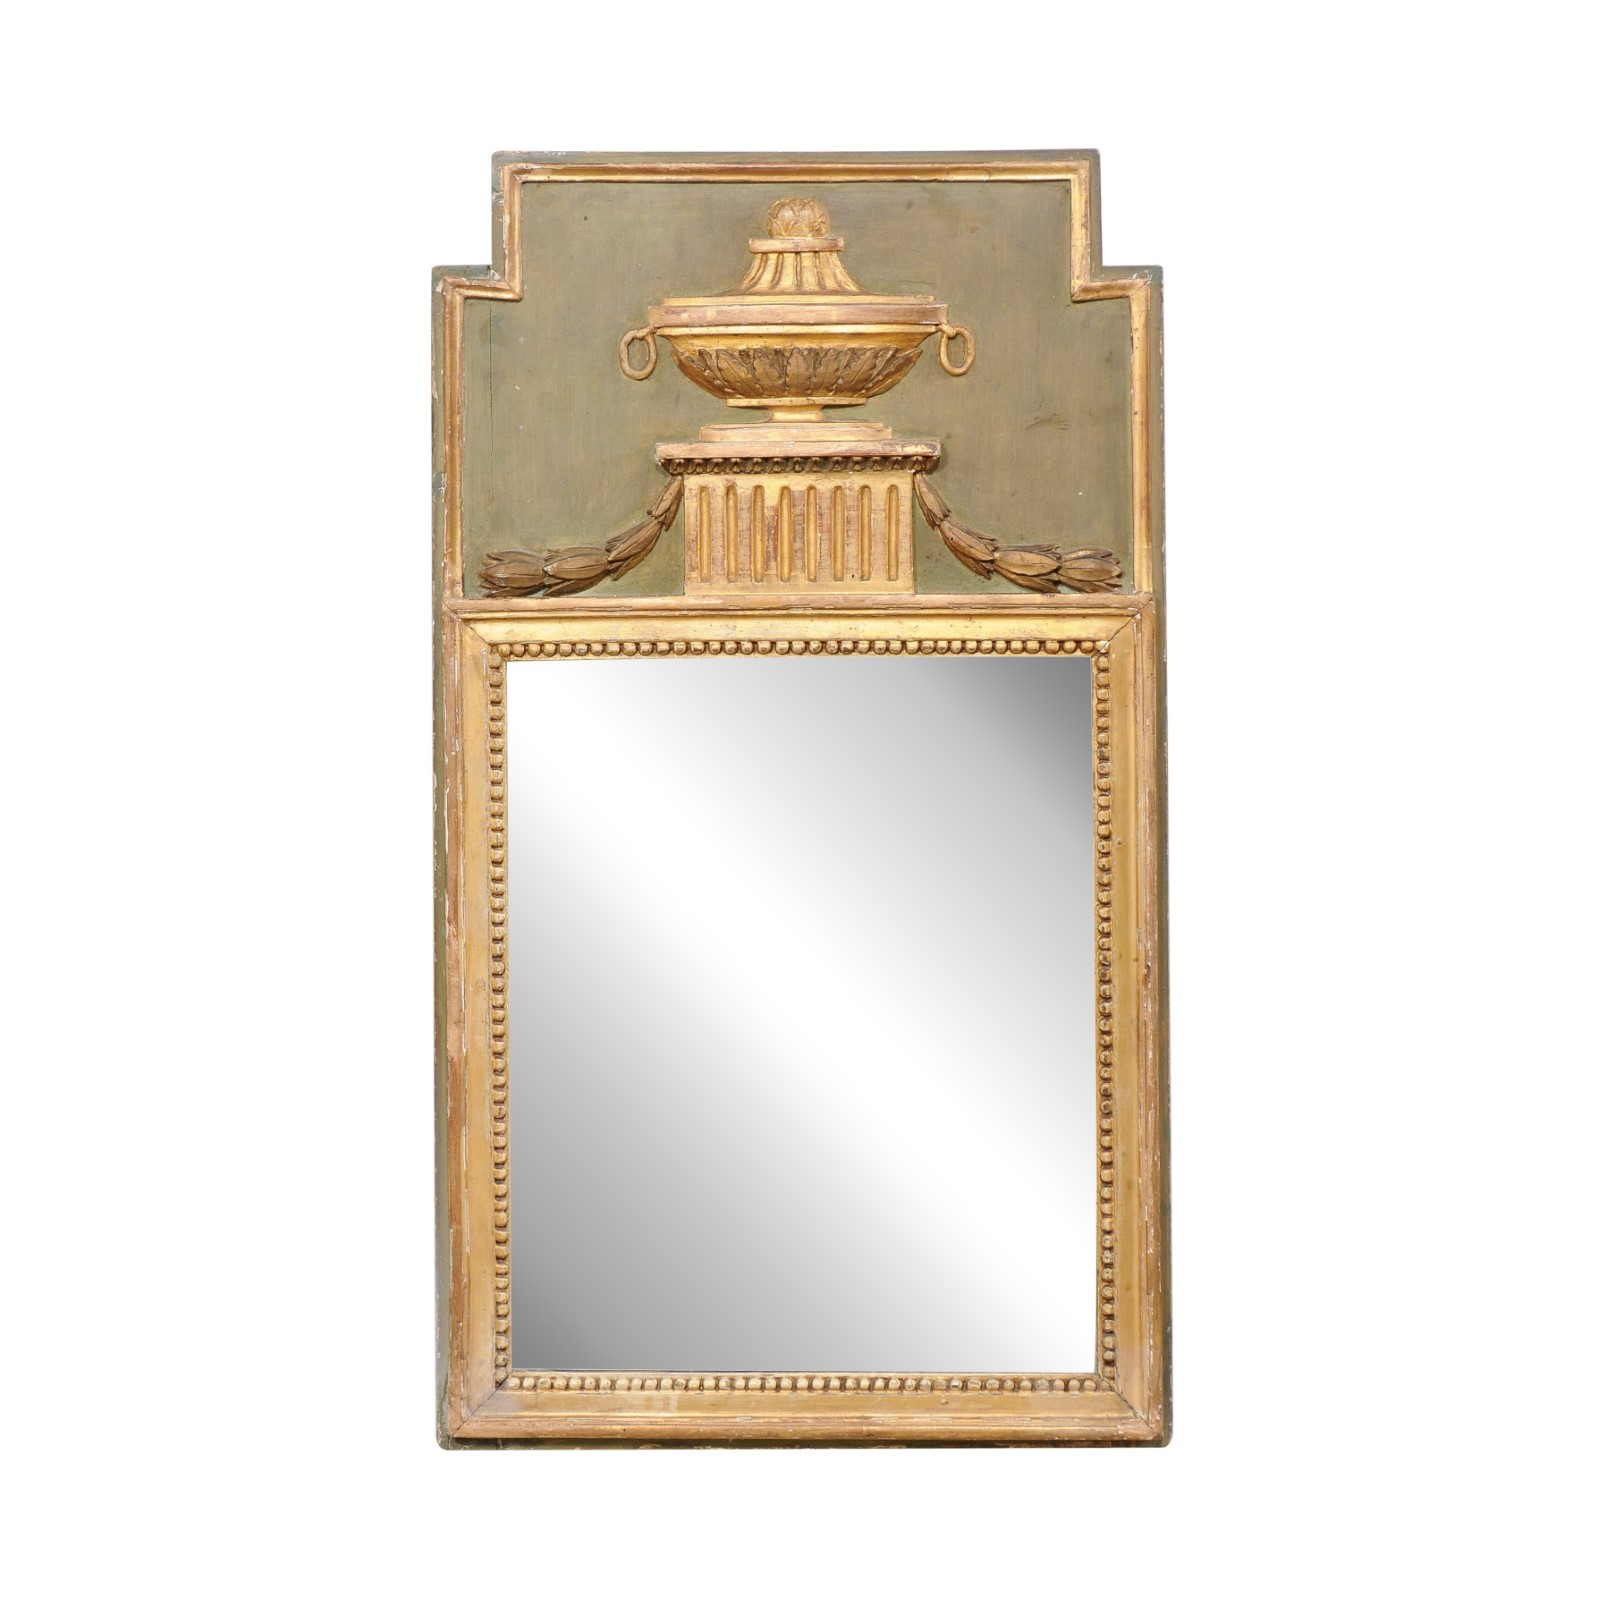 French Neoclassical Mirror, Early 19th C.